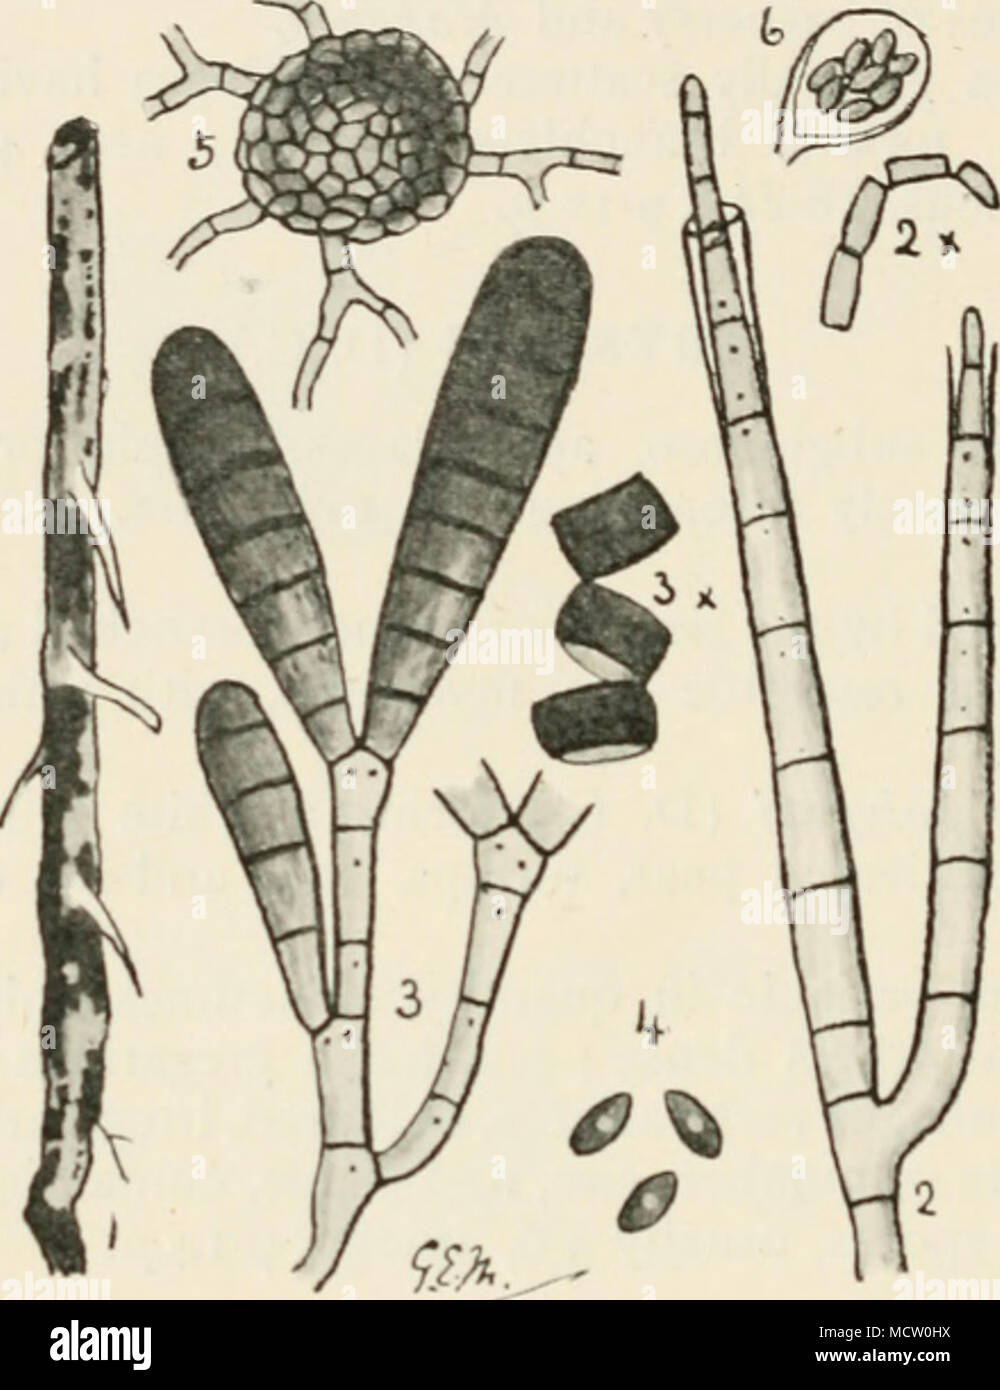 . l-&quot;i(j. .— Thielavia basicola. i, diseased pea root; 2, portion of first conidial stage {Miloiuia) ; 2 X , free conidia of same ; 3, second conidial stage {Torula); 3X, a conidium of same breaking u|) into cells ; 4, ;iscospores ; 5, perilhecium on winter fruit; 6, ascus containing' 8 spores, from winter fruit. Fig. I nat. size; remainder highly mag. fungus was a true parasite, and although capable of existing on manure and dead i)lants as a saprophyte, recent observa- tions and experiments have proved that under certain condi- tions, more especially on badly drained or water-logged s Stock Photo